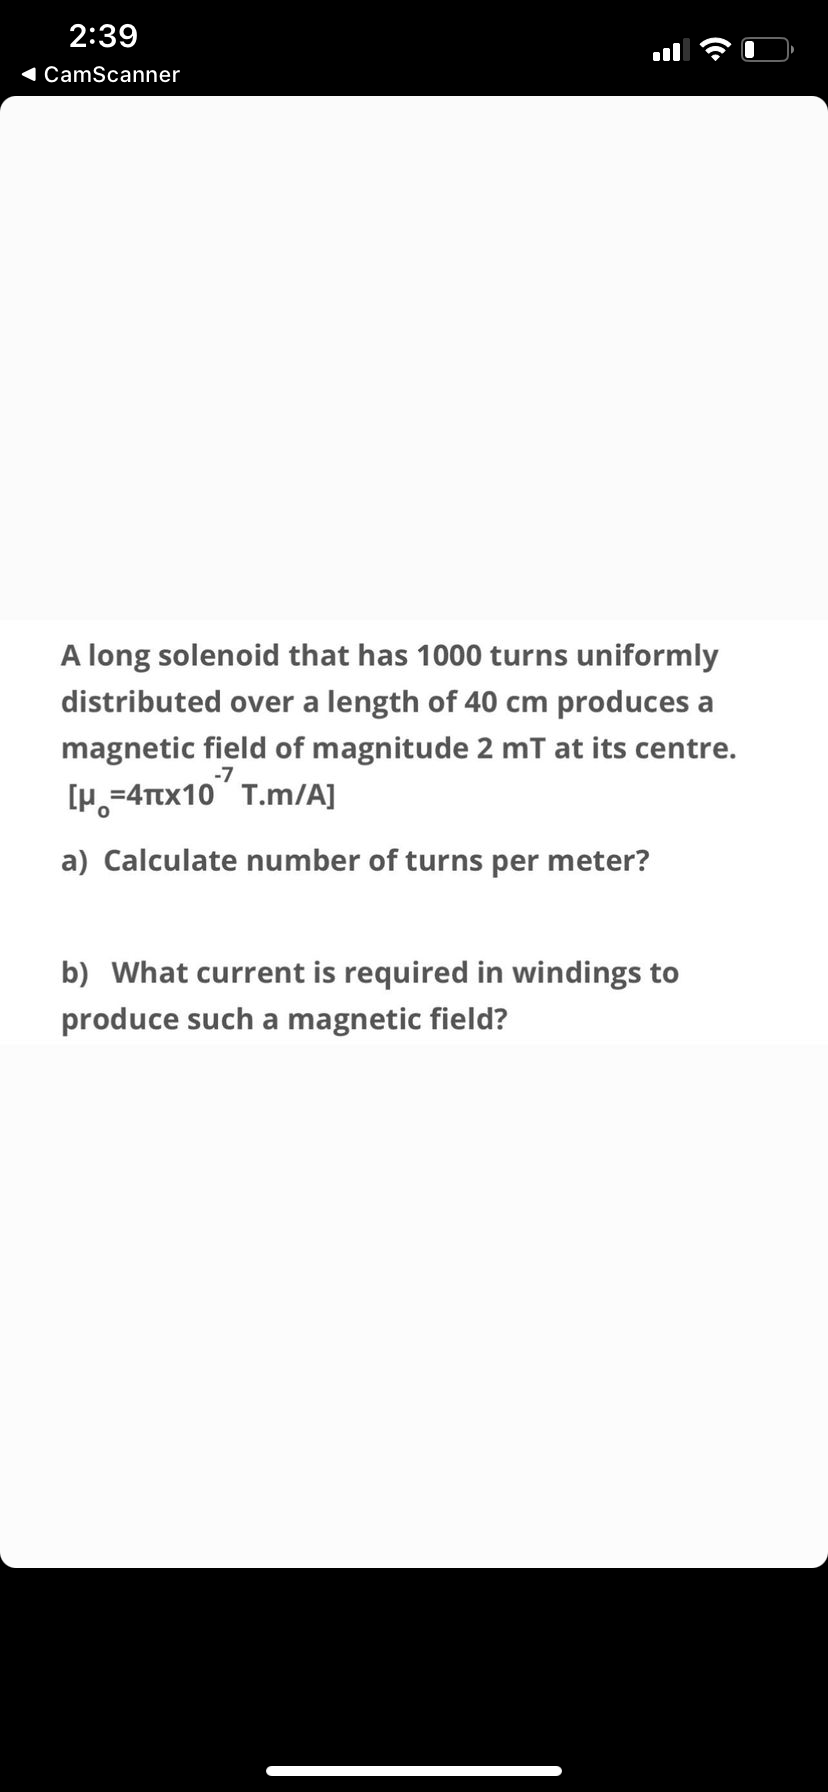 2:39
1 CamScanner
A long solenoid that has 1000 turns uniformly
distributed over a length of 40 cm produces a
magnetic field of magnitude 2 mT at its centre.
[p,=4Ttx10" T.m/A]
-7
a) Calculate number of turns per meter?
b) What current is required in windings to
produce such a magnetic field?
